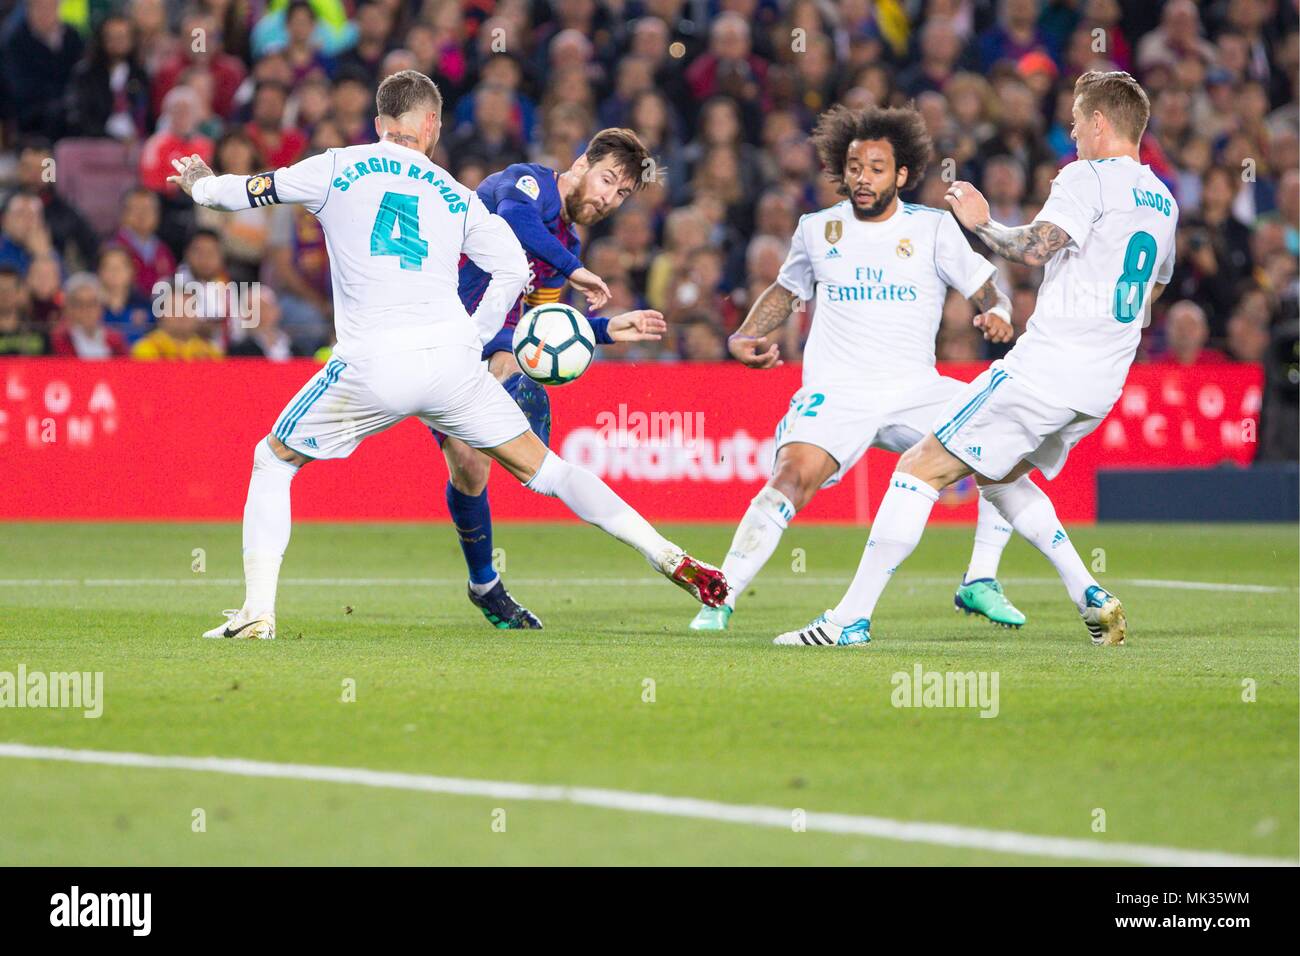 SPAIN - 6th of May: FC Barcelona forward Lionel Messi (10), Real Madrid defender Marcelo (12), Real Madrid midfielder Toni Kroos (8) and Real Madrid defender Sergio Ramos (4) during the match between FC Barcelona against Real Madrid for the round 36 of the Liga Santander, played at Camp Nou Stadium on 6th May 2018 in Barcelona, Spain. (Credit: Mikel Trigueros /Urbanandsport / Cordon Press)  Cordon Press Stock Photo